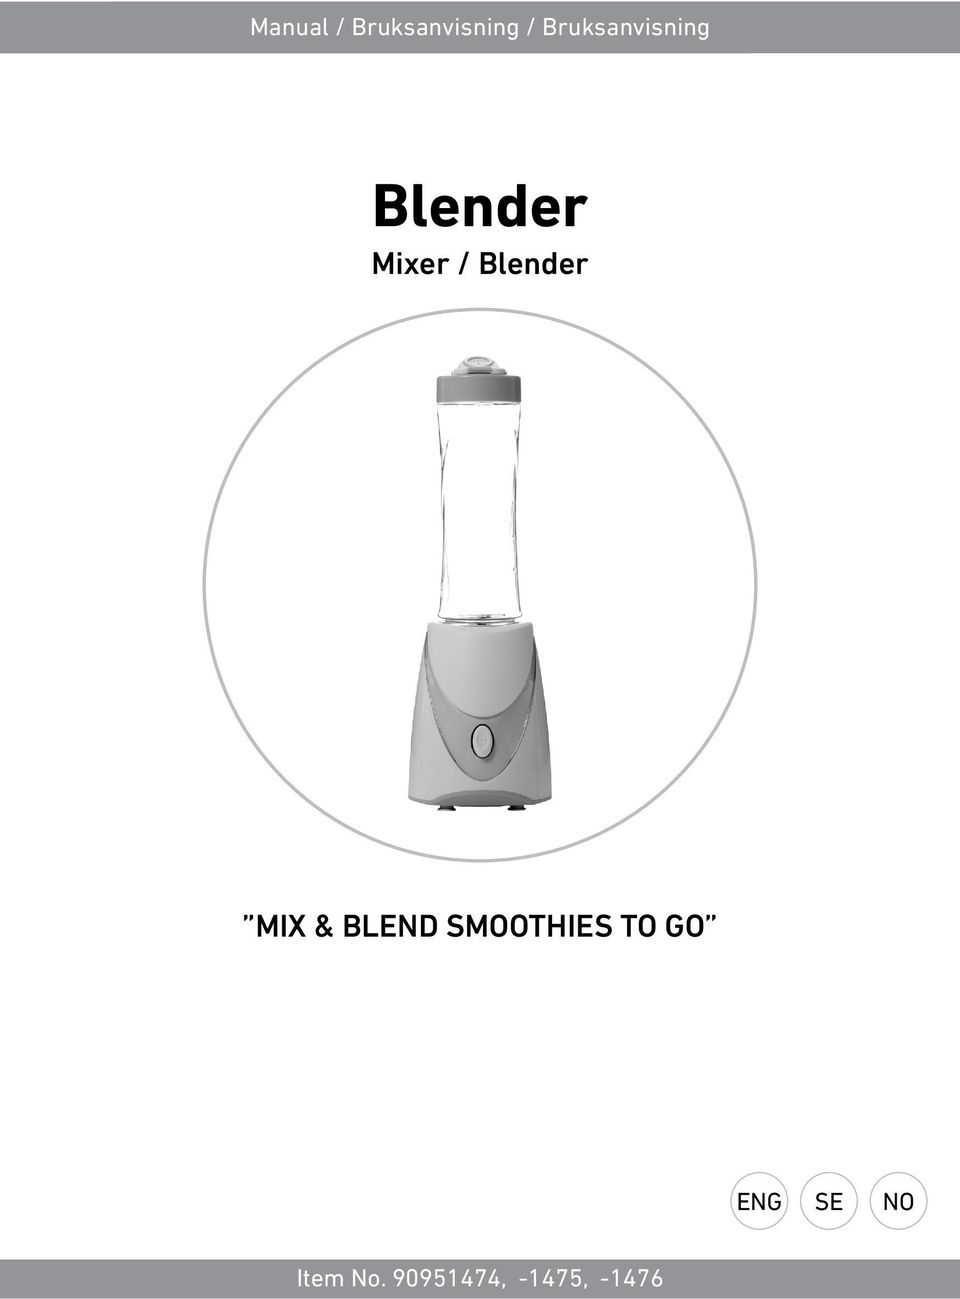 Blender MIX & BLEND SMOOTHIES TO